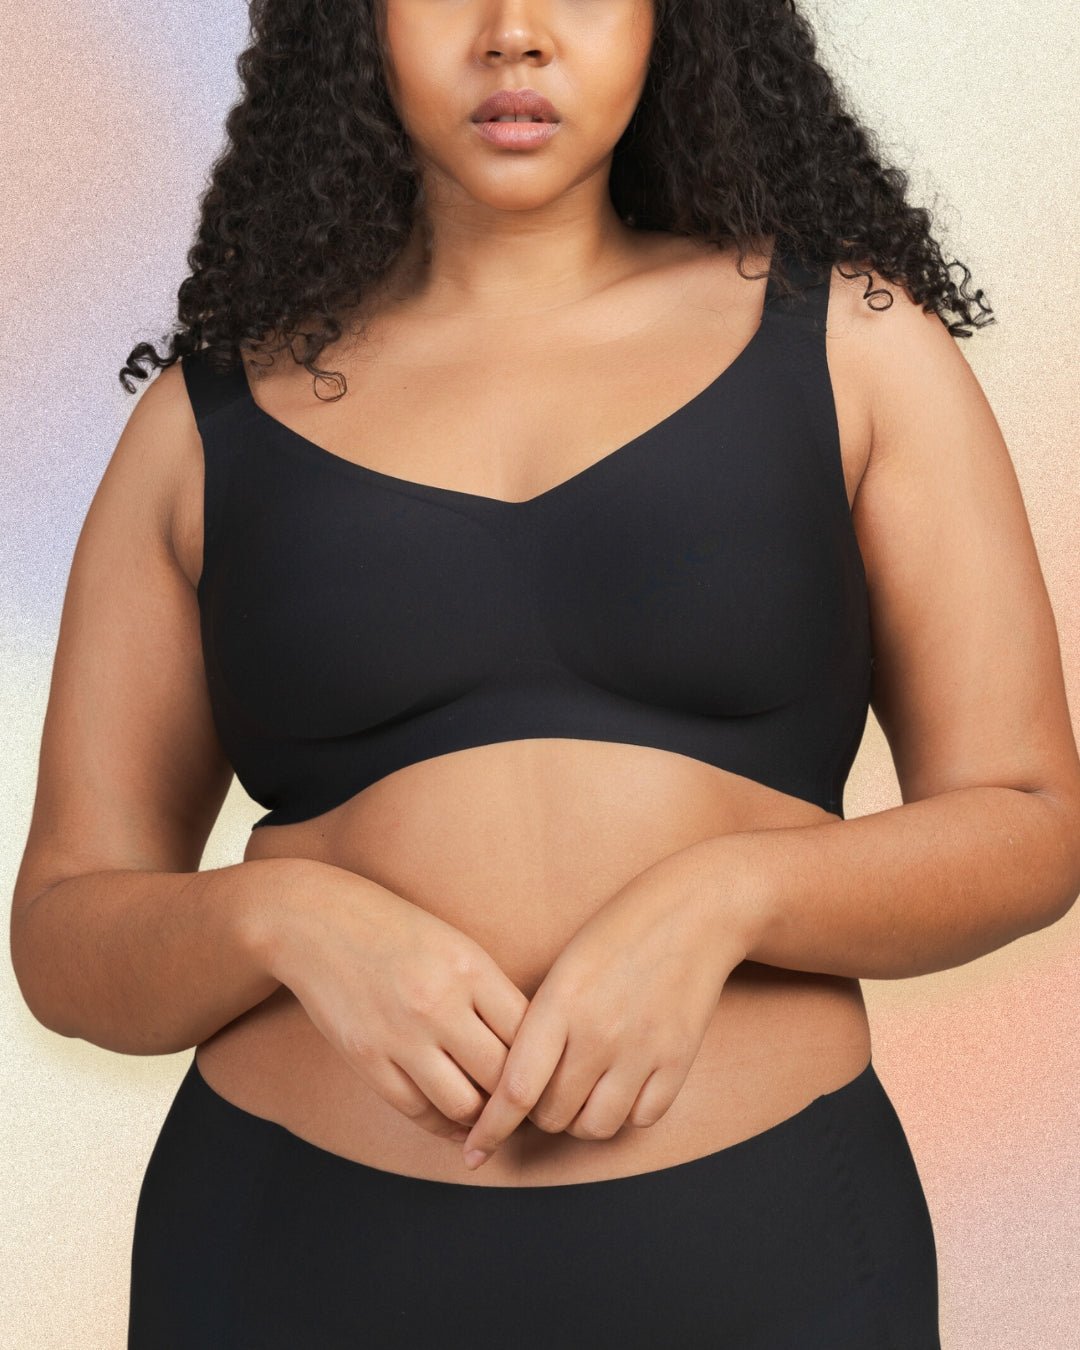 Snap Front Seamless Bra with Ultra-Wide Straps For Comfort and Support,  Plush Fabric - Black, Large 